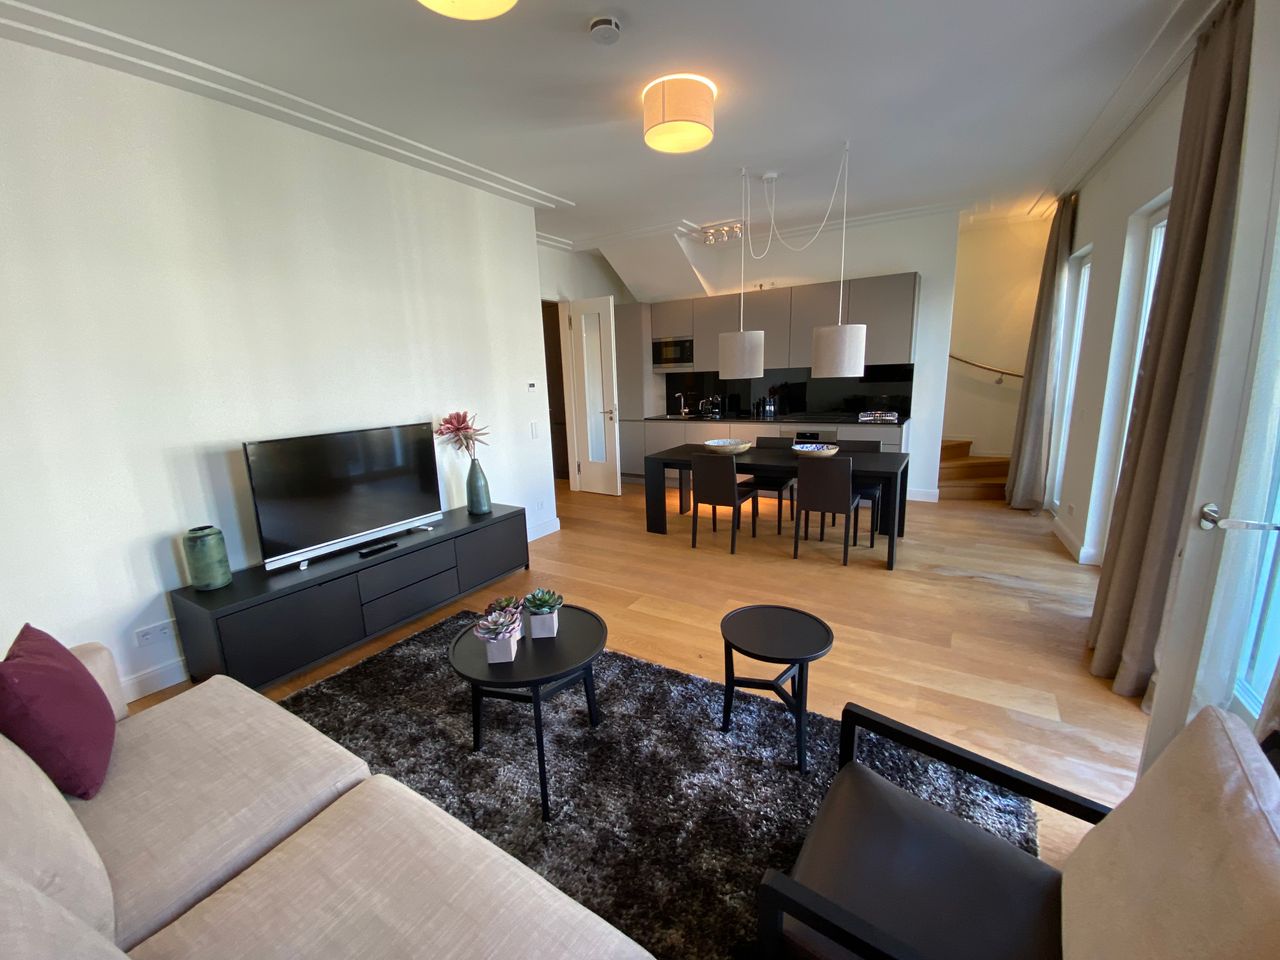 Lovingly furnished and charming penthouse in the heart of Düsseldorf